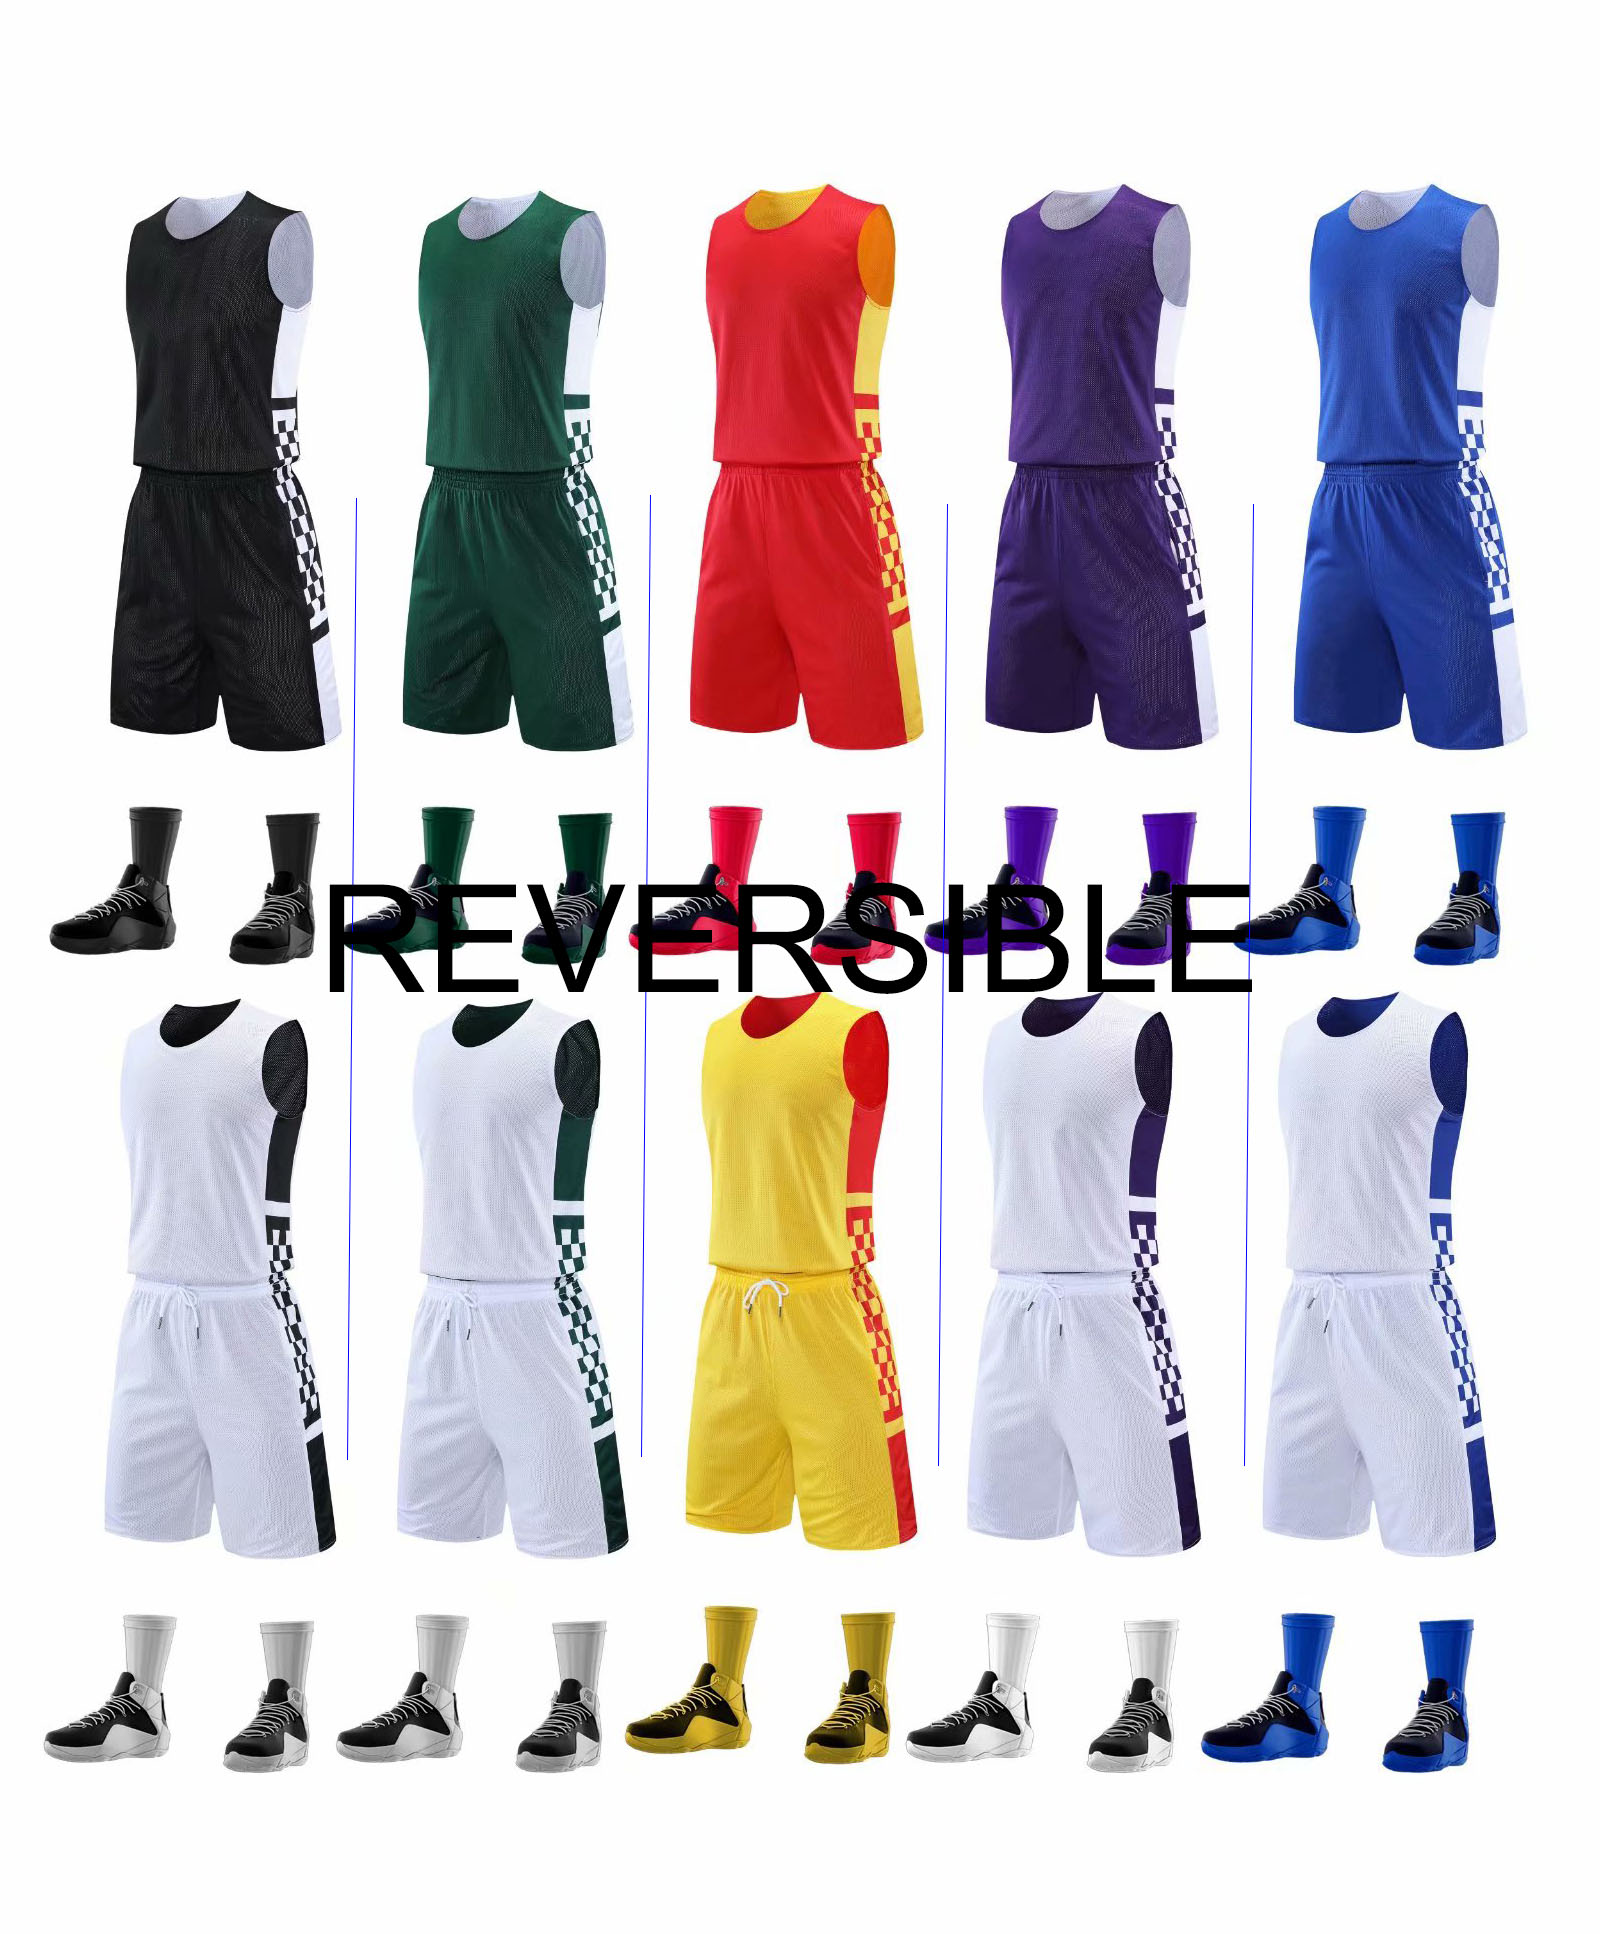 Y0242 reversible basketball jersey